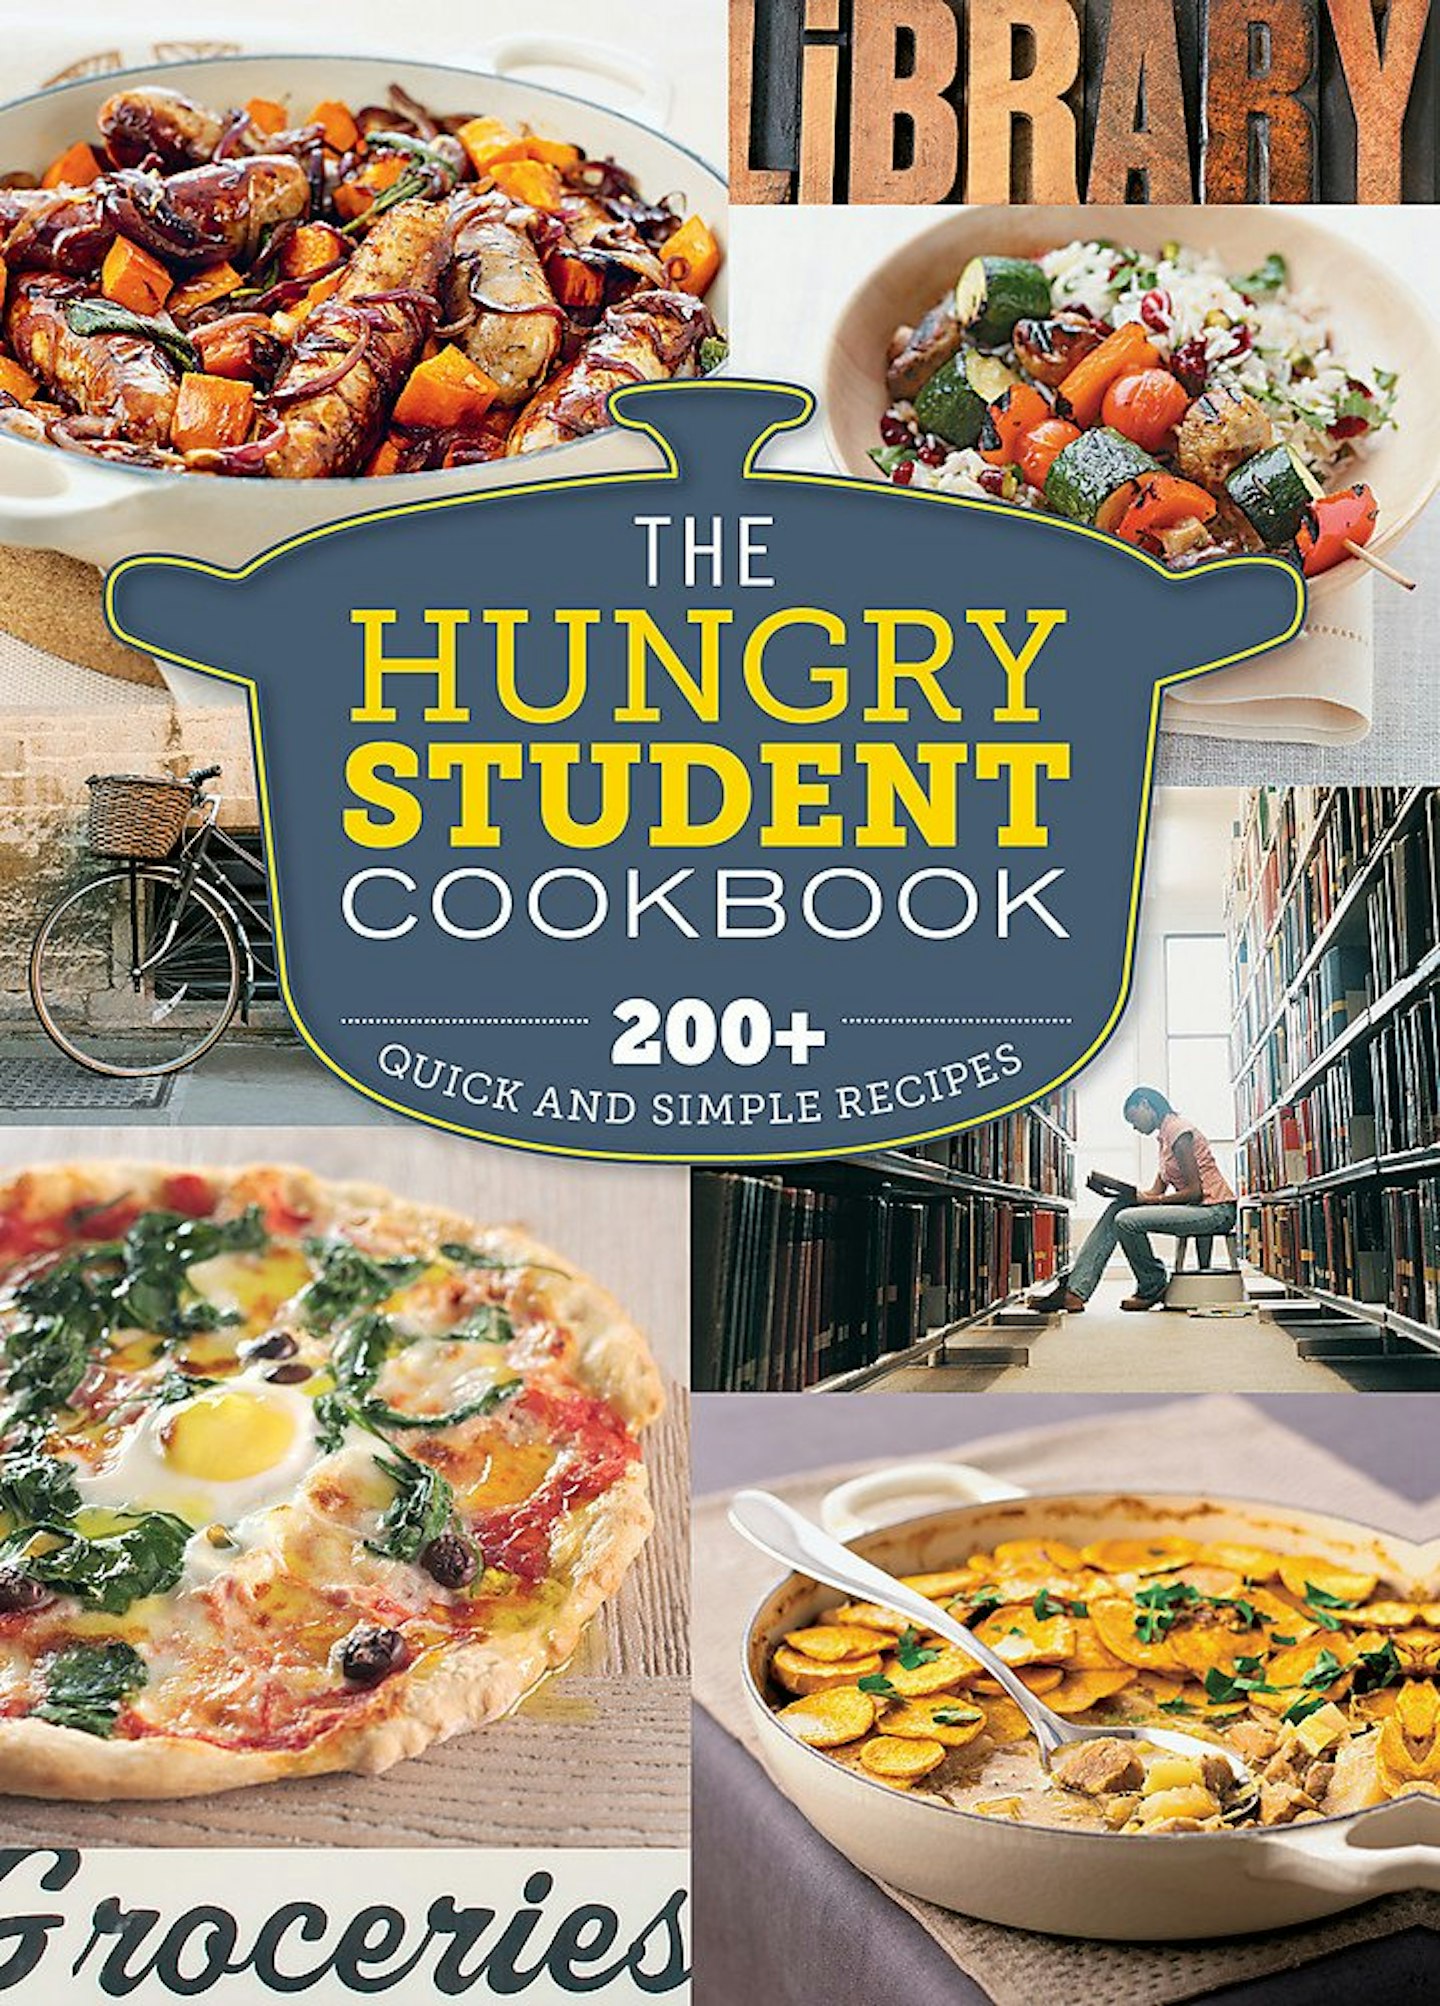 The Hungry Student Cookbook, £6.99